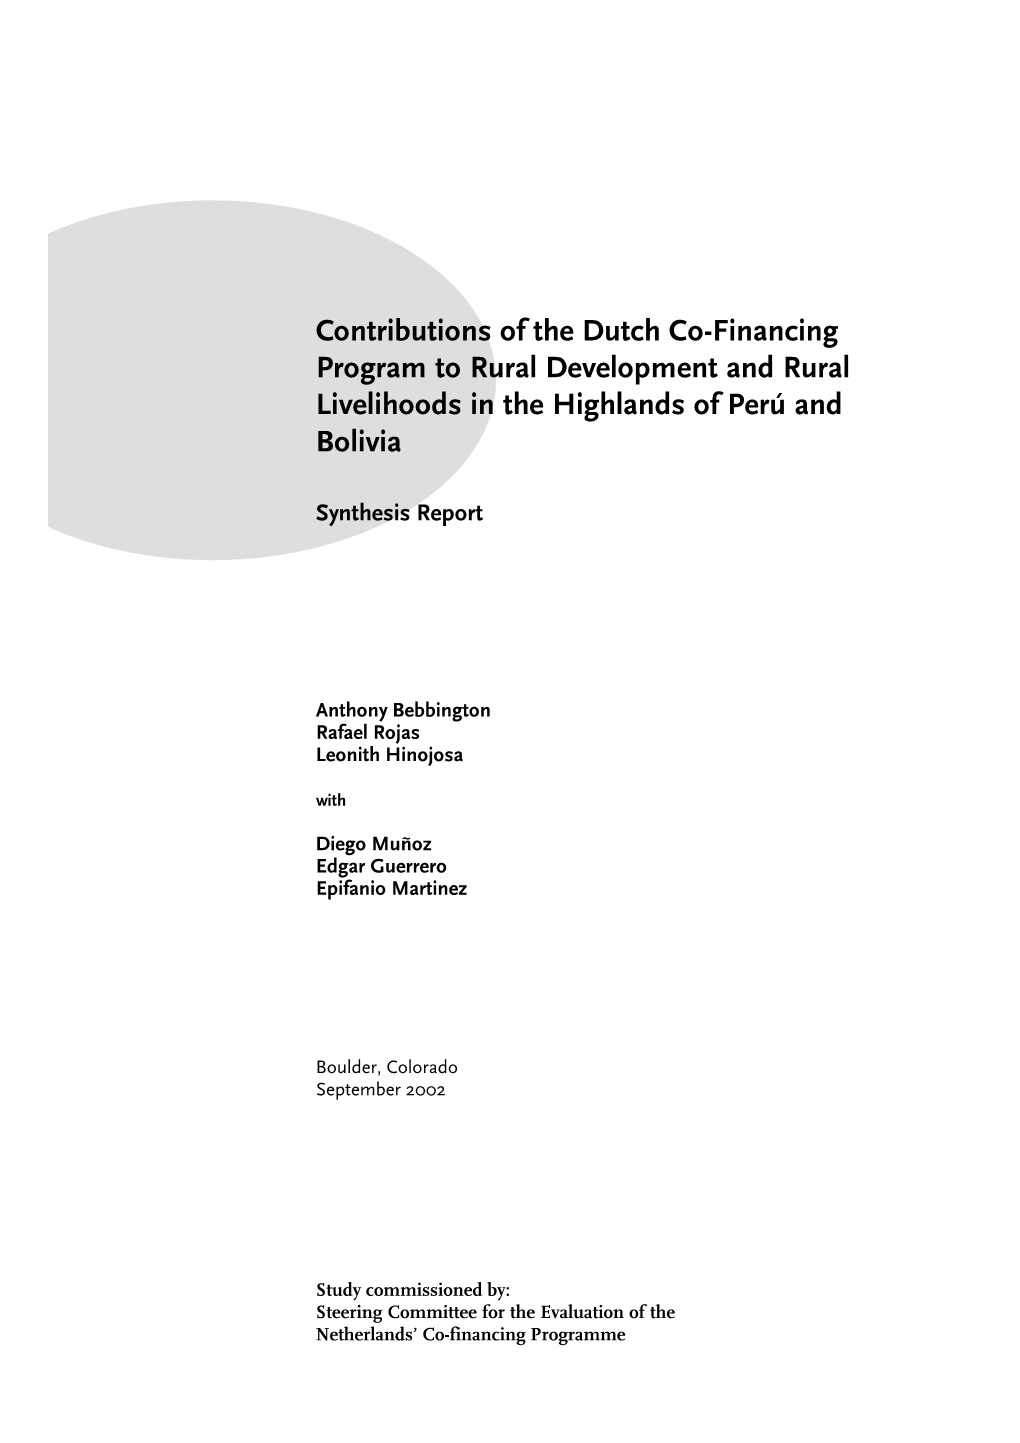 Contributions of the Dutch Co-Financing Program to Rural Development and Rural Livelihoods in the Highlands of Perú and Bolivia